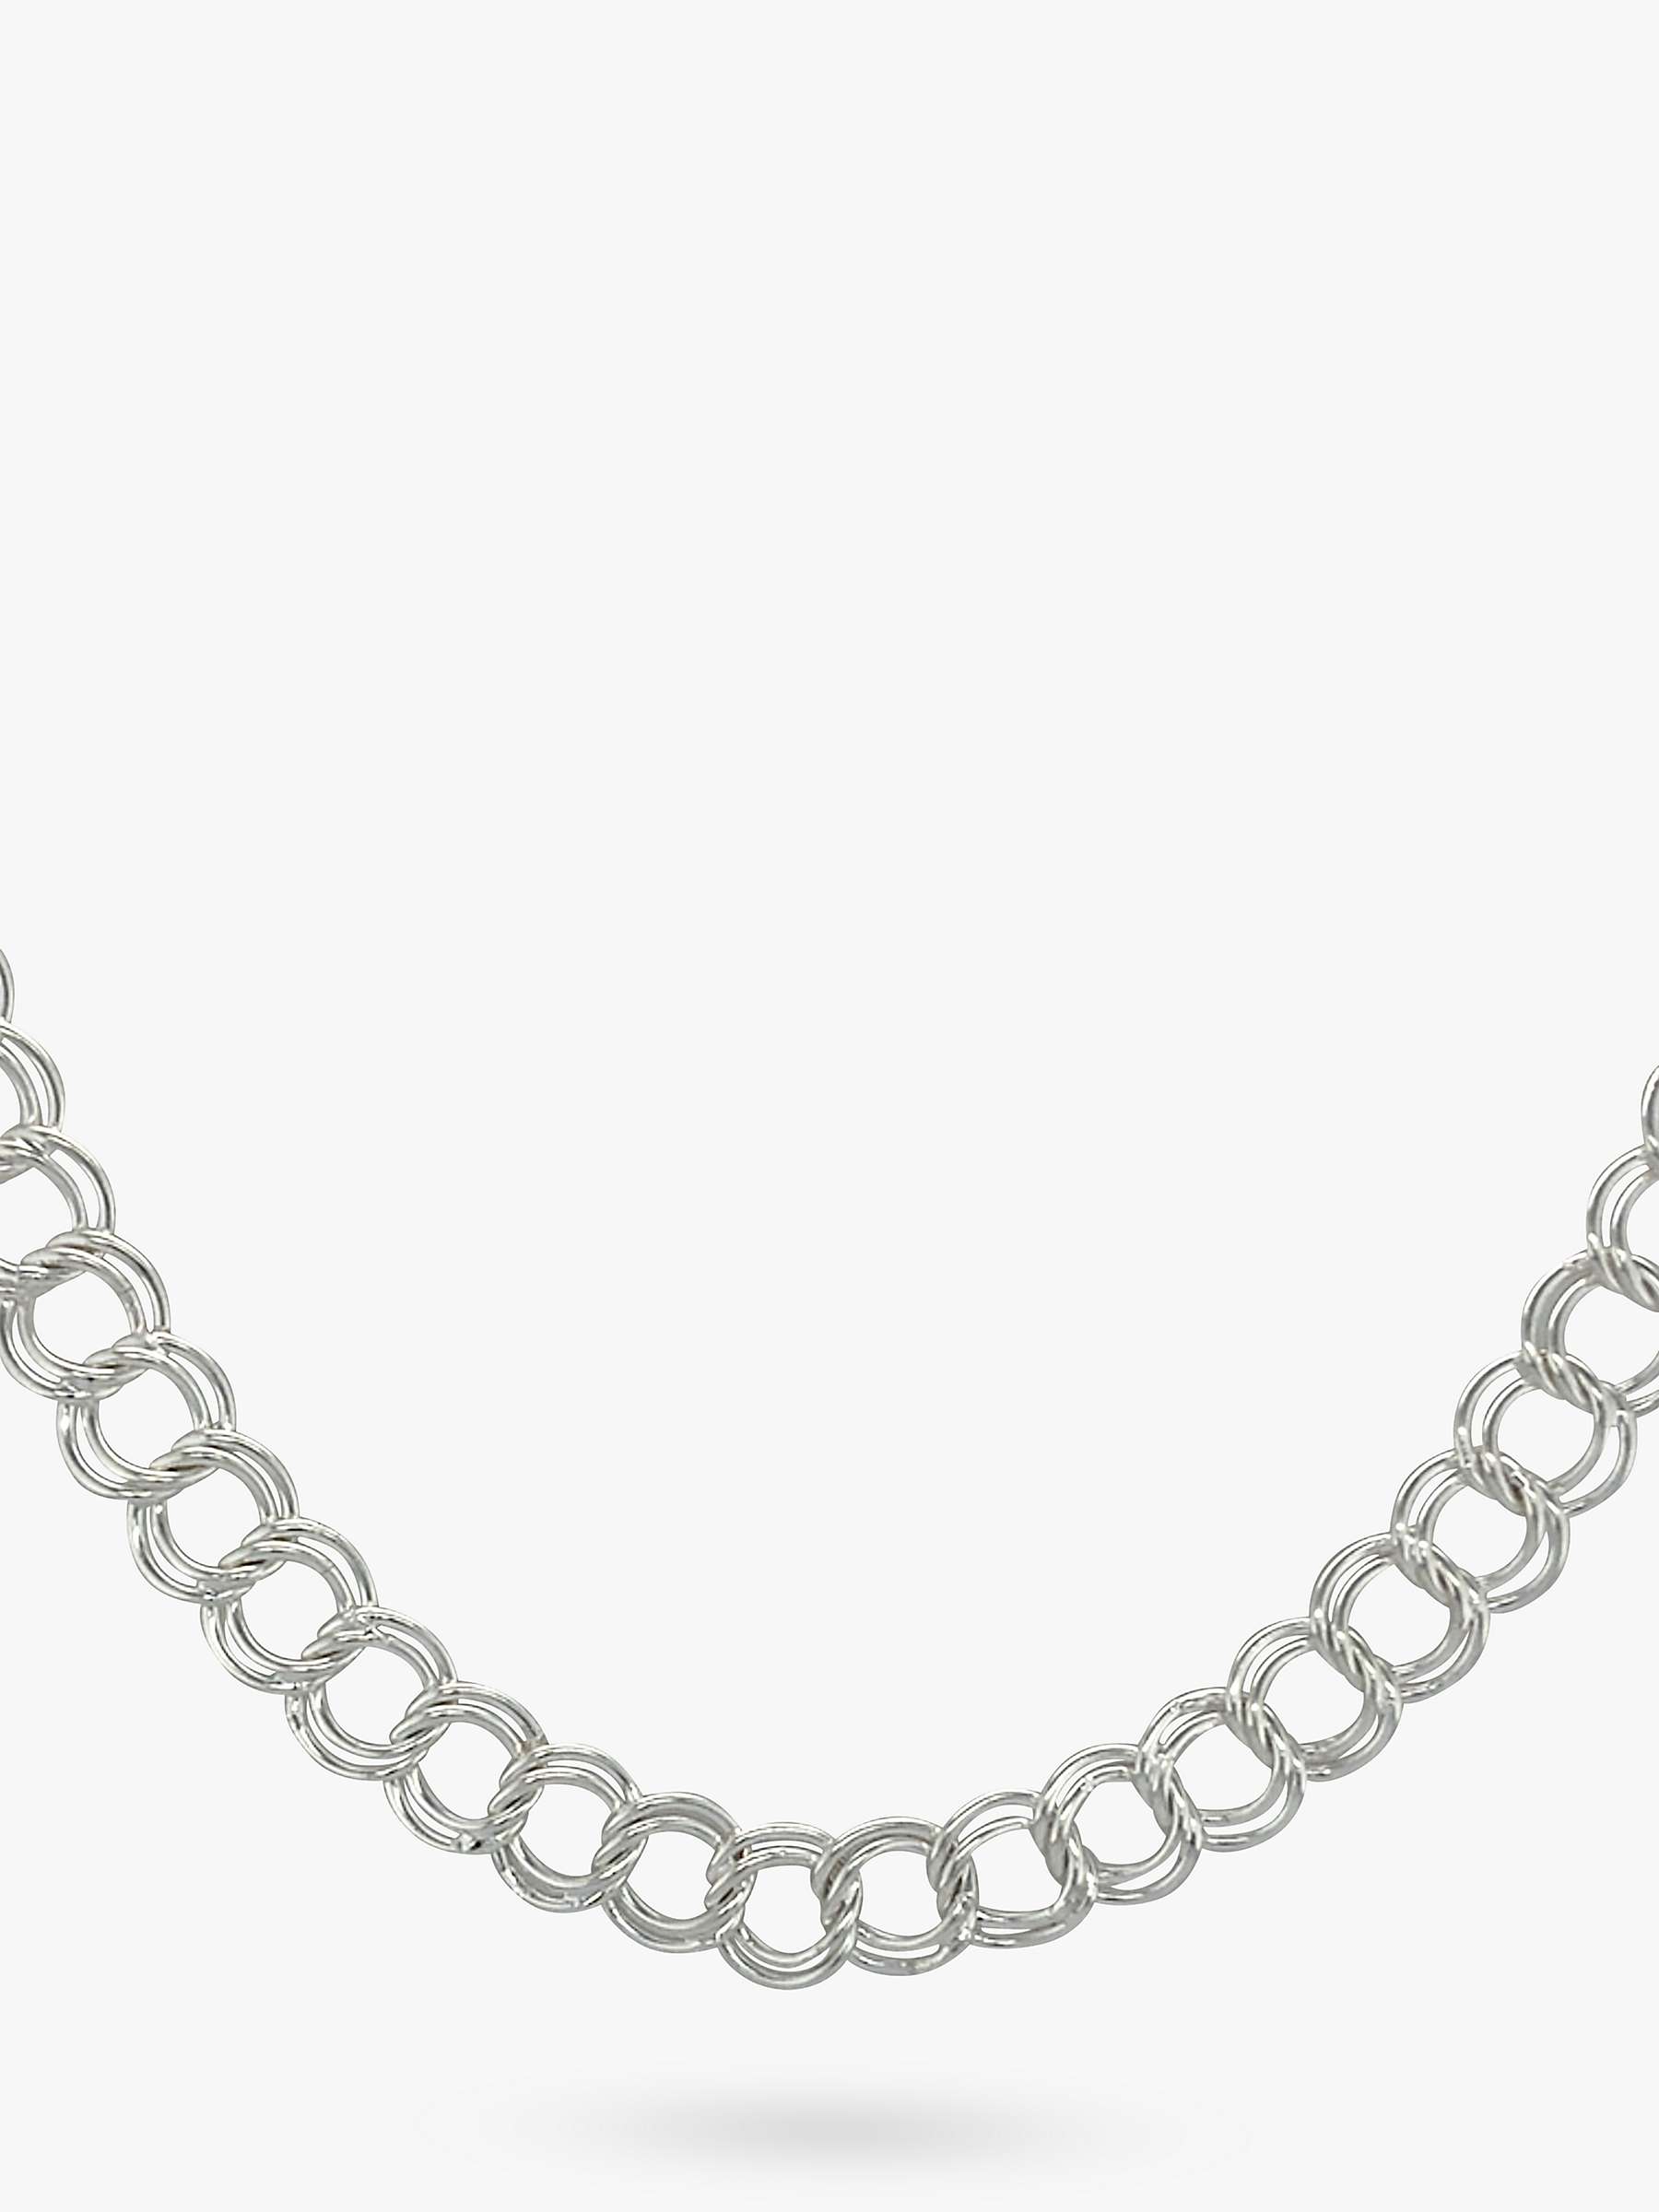 Buy Vintage Fine Jewellery Second Hand Double Curb Link Chain Necklace, Dated Circa 1980s Online at johnlewis.com